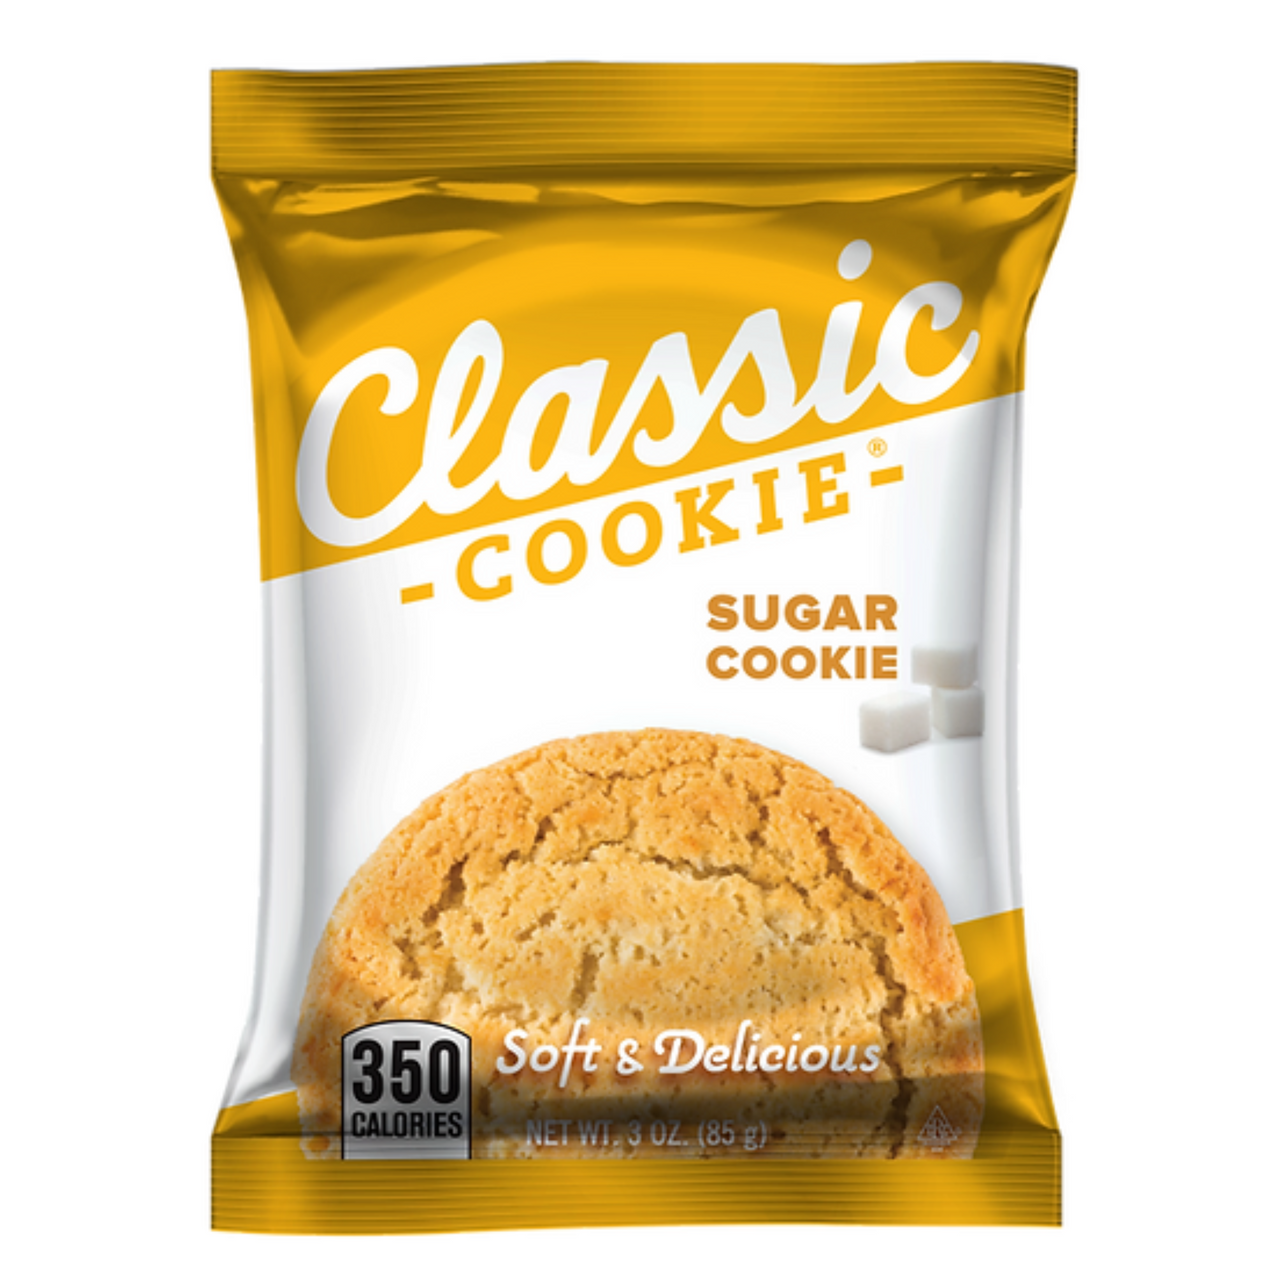 Classic Cookie Soft Baked Snickerdoodle Cookies, 2 Boxes, 16 Individually  Wrapped Cookies